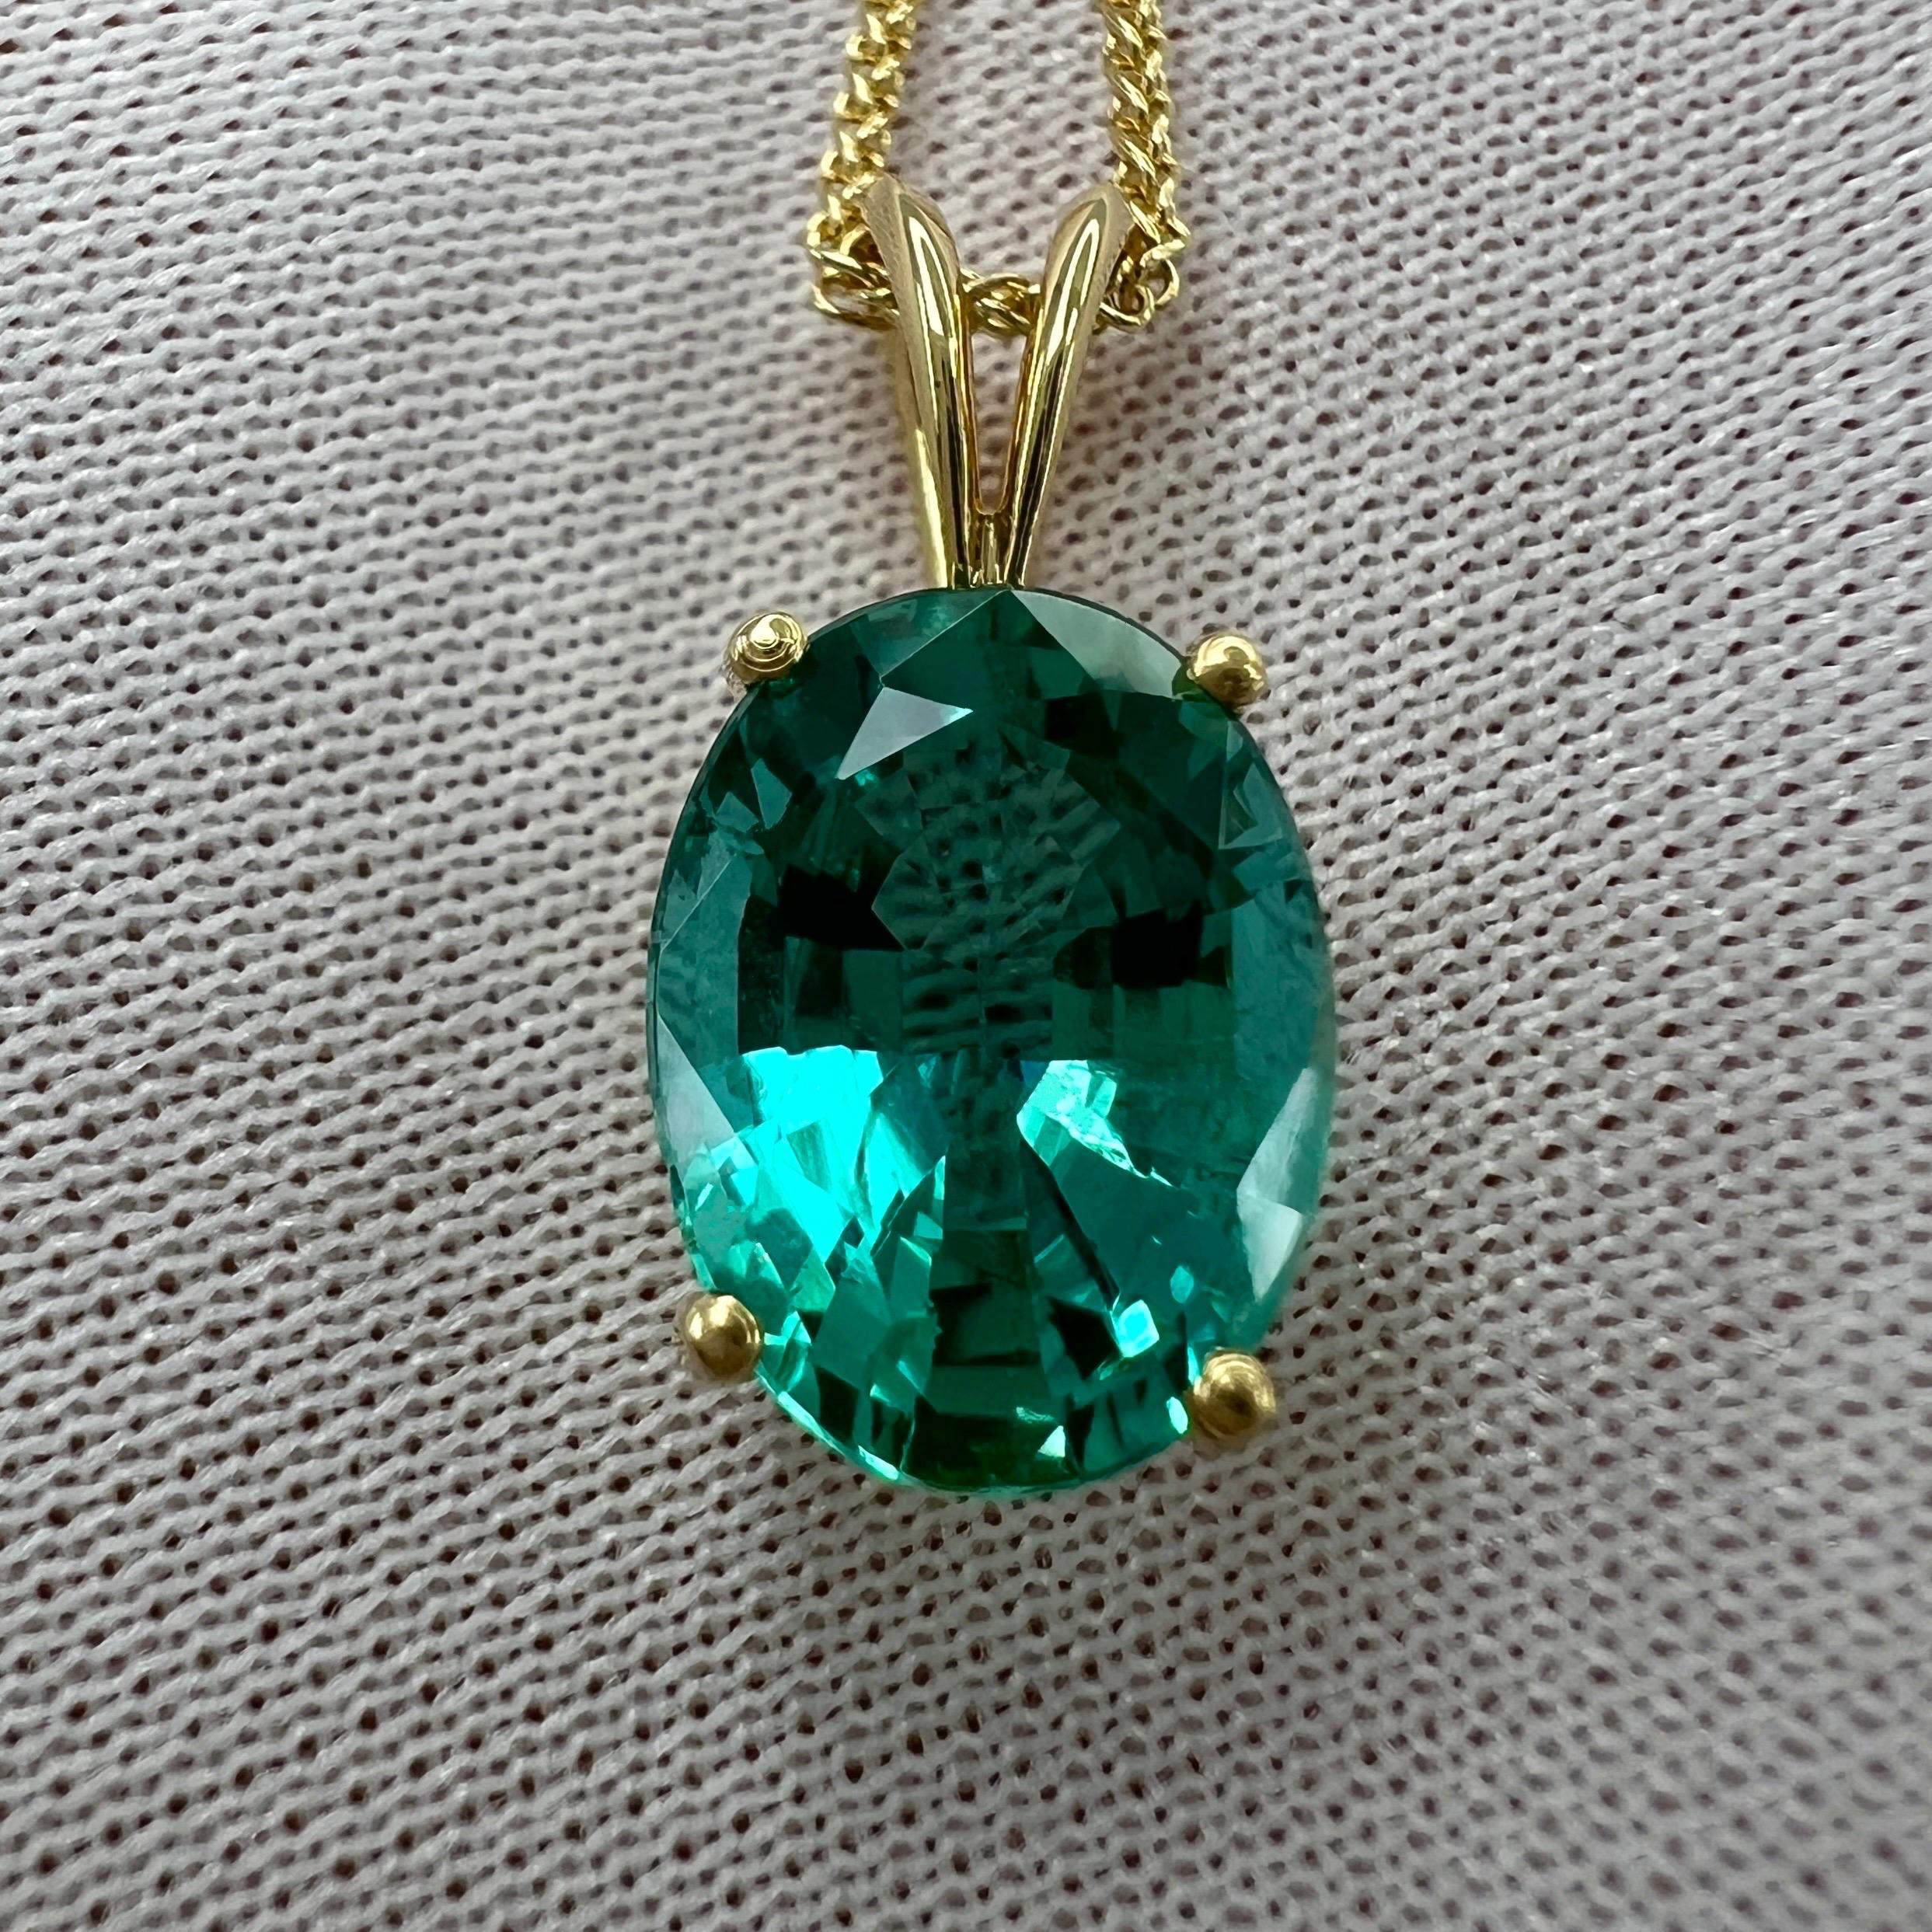 Natural Fine Vivid Blue Green Oval Cut Emerald 18k Yellow Gold Solitaire Pendant Necklace.

Beautiful emerald with a unique vivid blue-green colour, set in a fine 18 karat yellow gold 4 claw solitaire pendant. 
The stone truly glows under direct